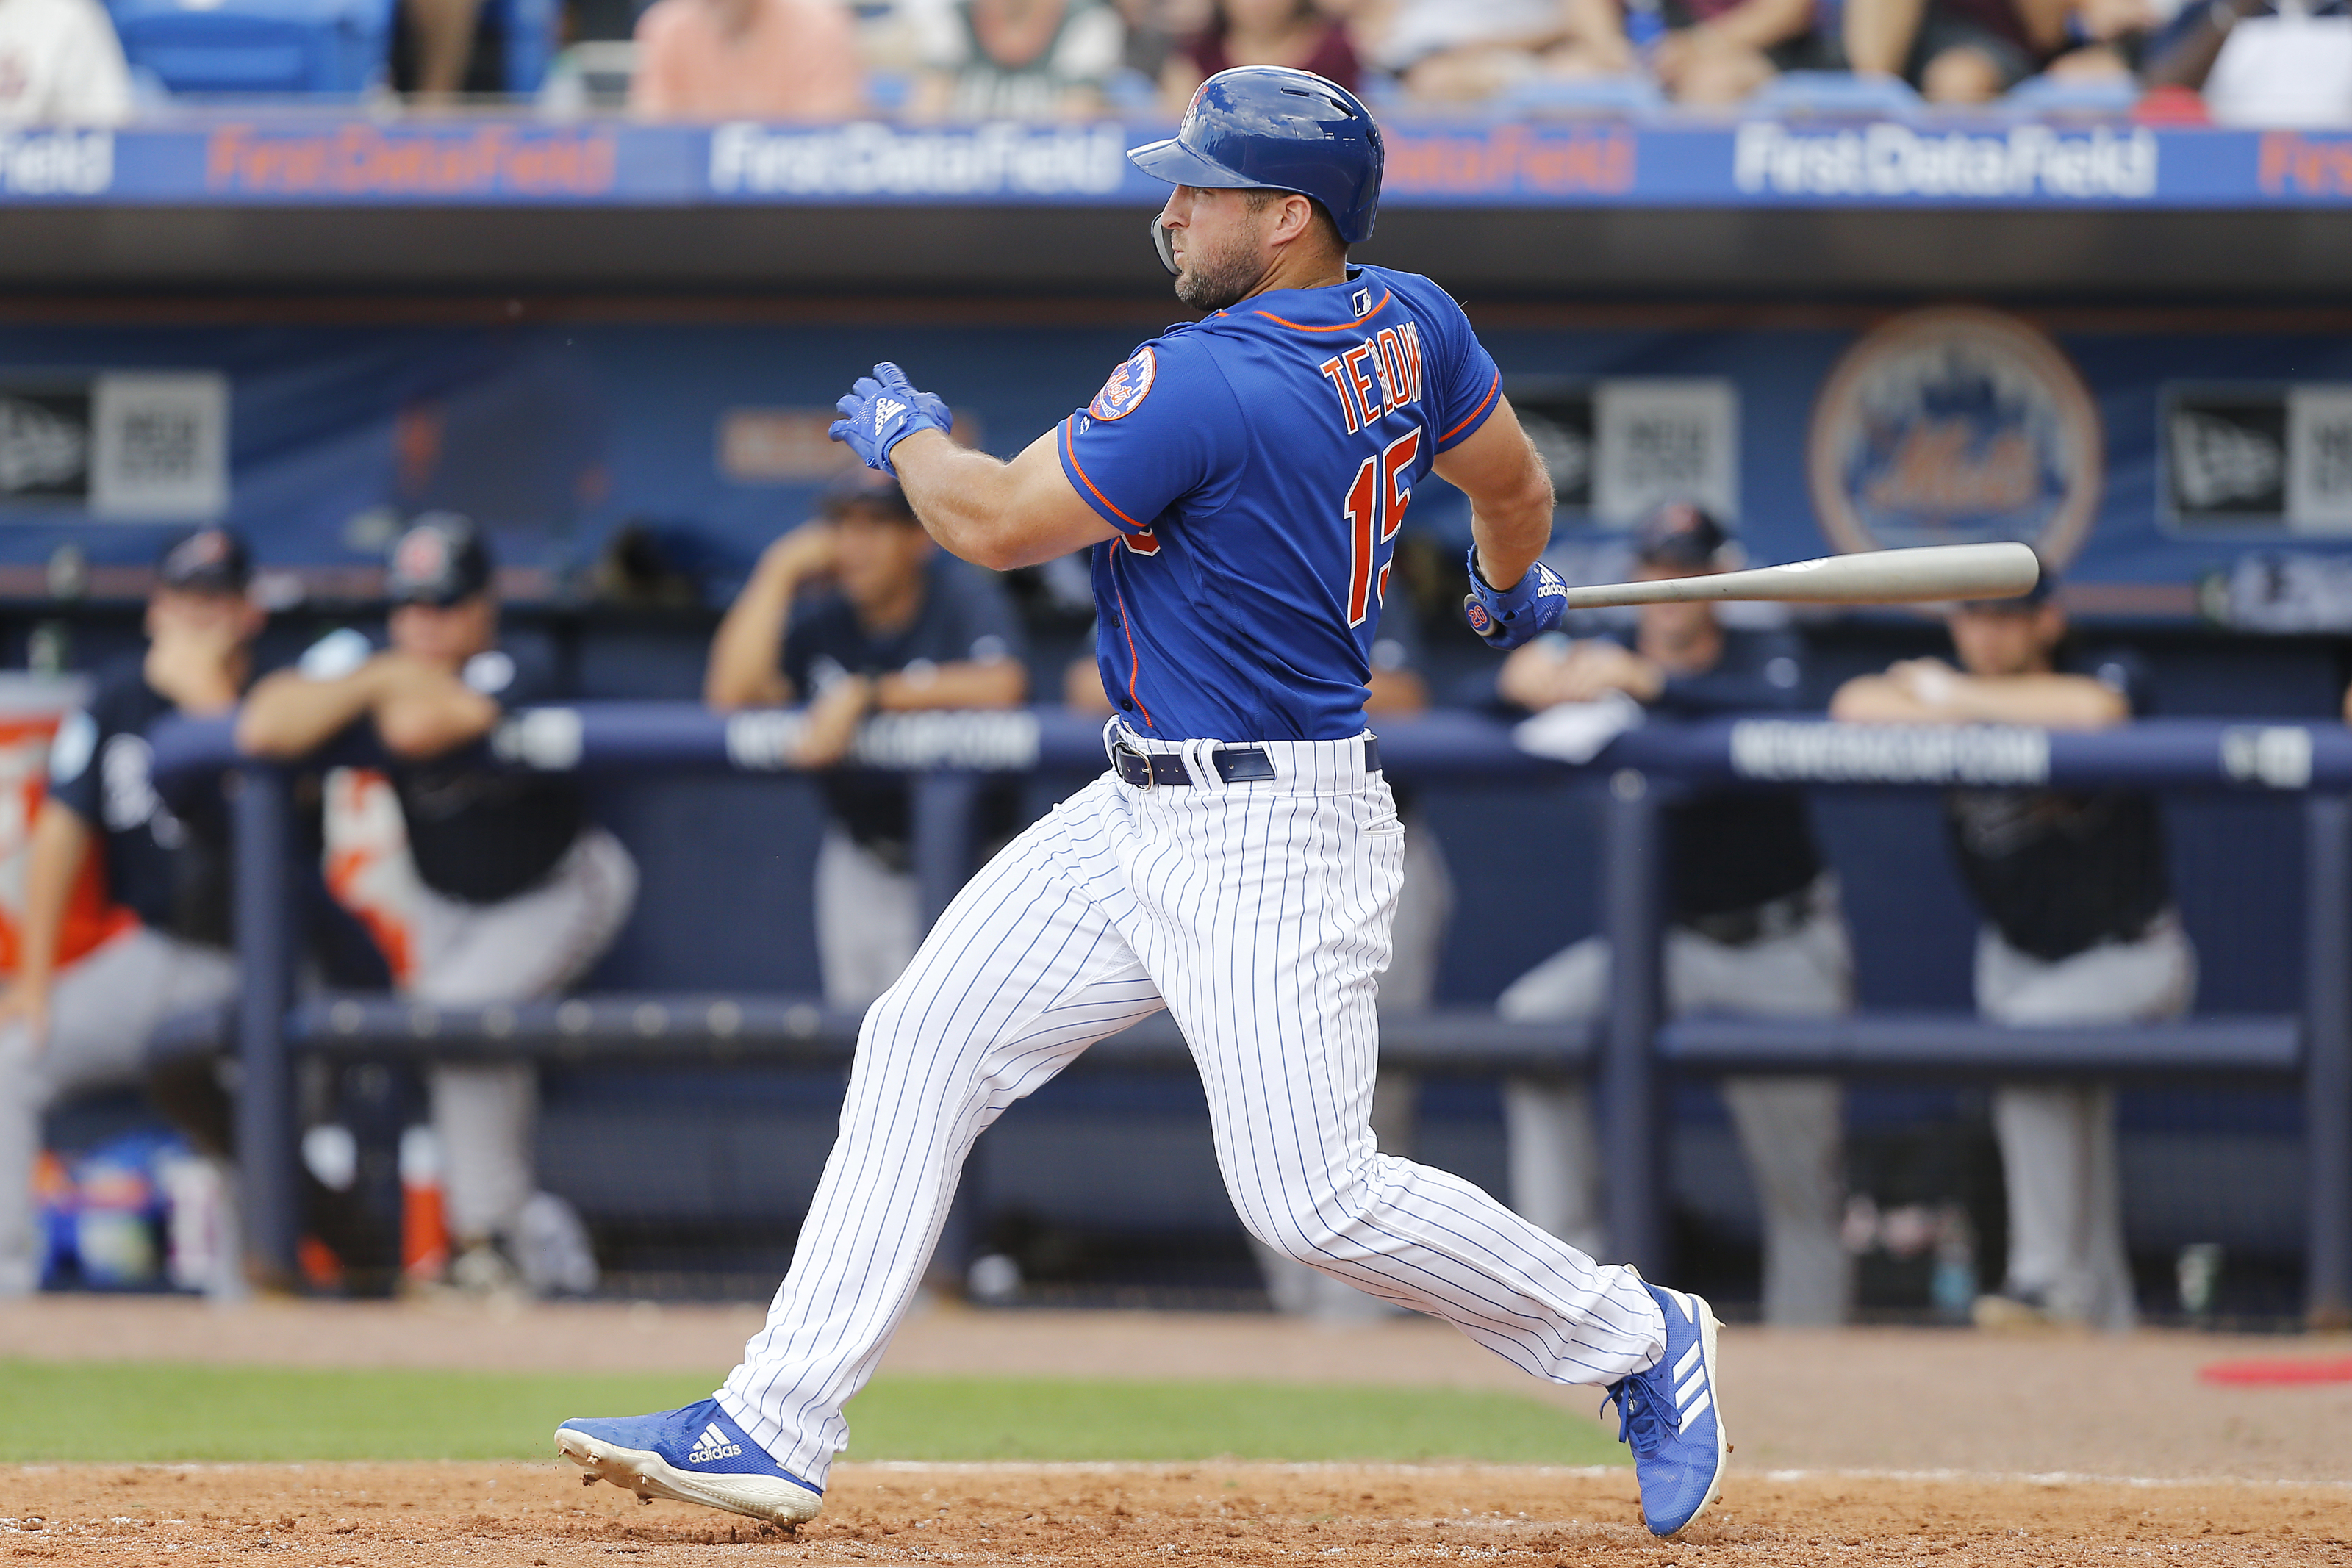 Report: Tim Tebow 'still in consideration' for spot on Mets' roster